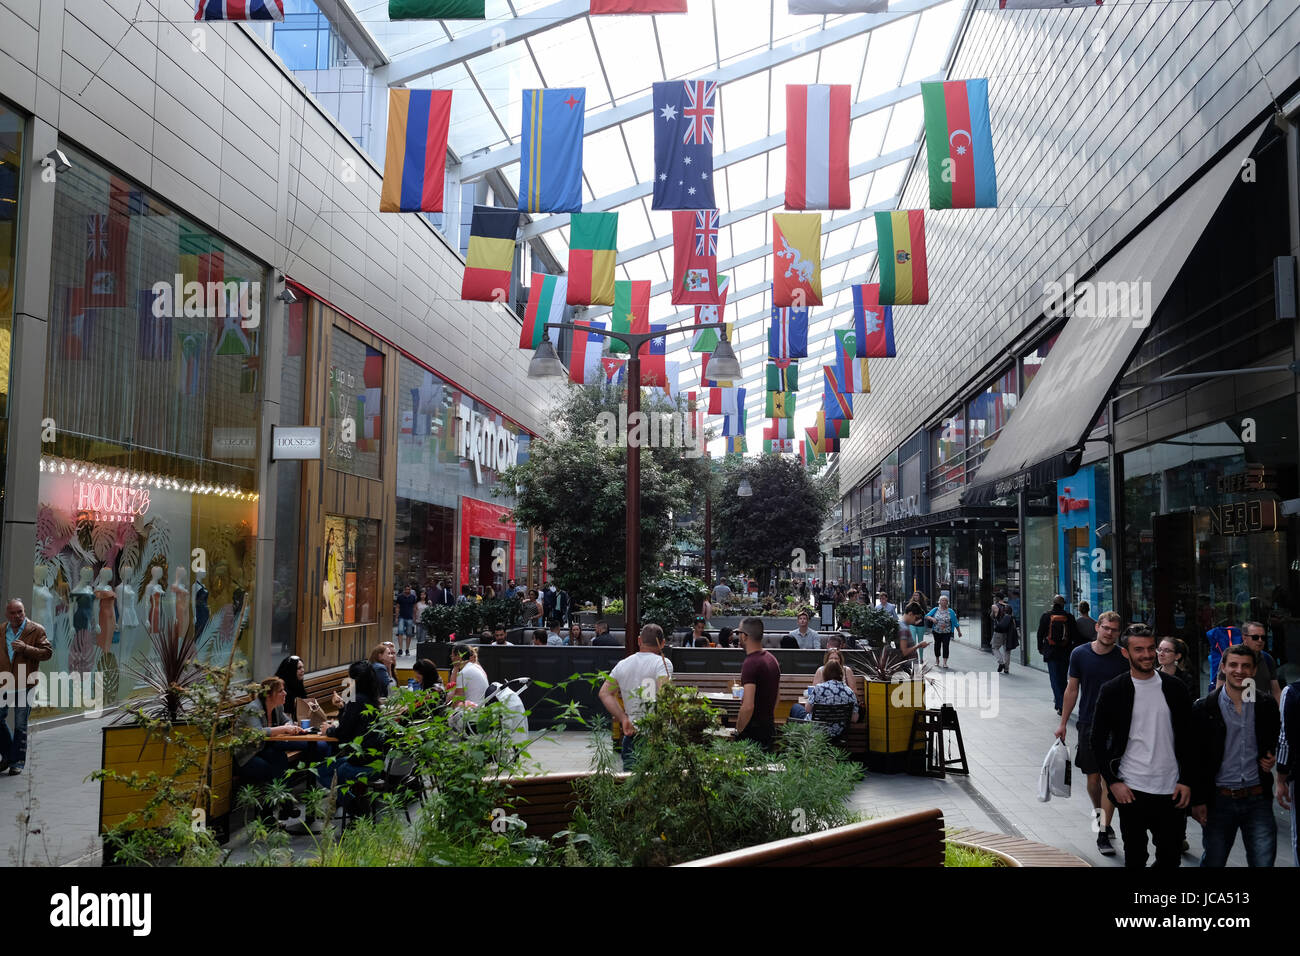 Flags representing various countries of the world are displayed in Westfield Stratford City shopping centre in Stratford, London, UK. Stock Photo